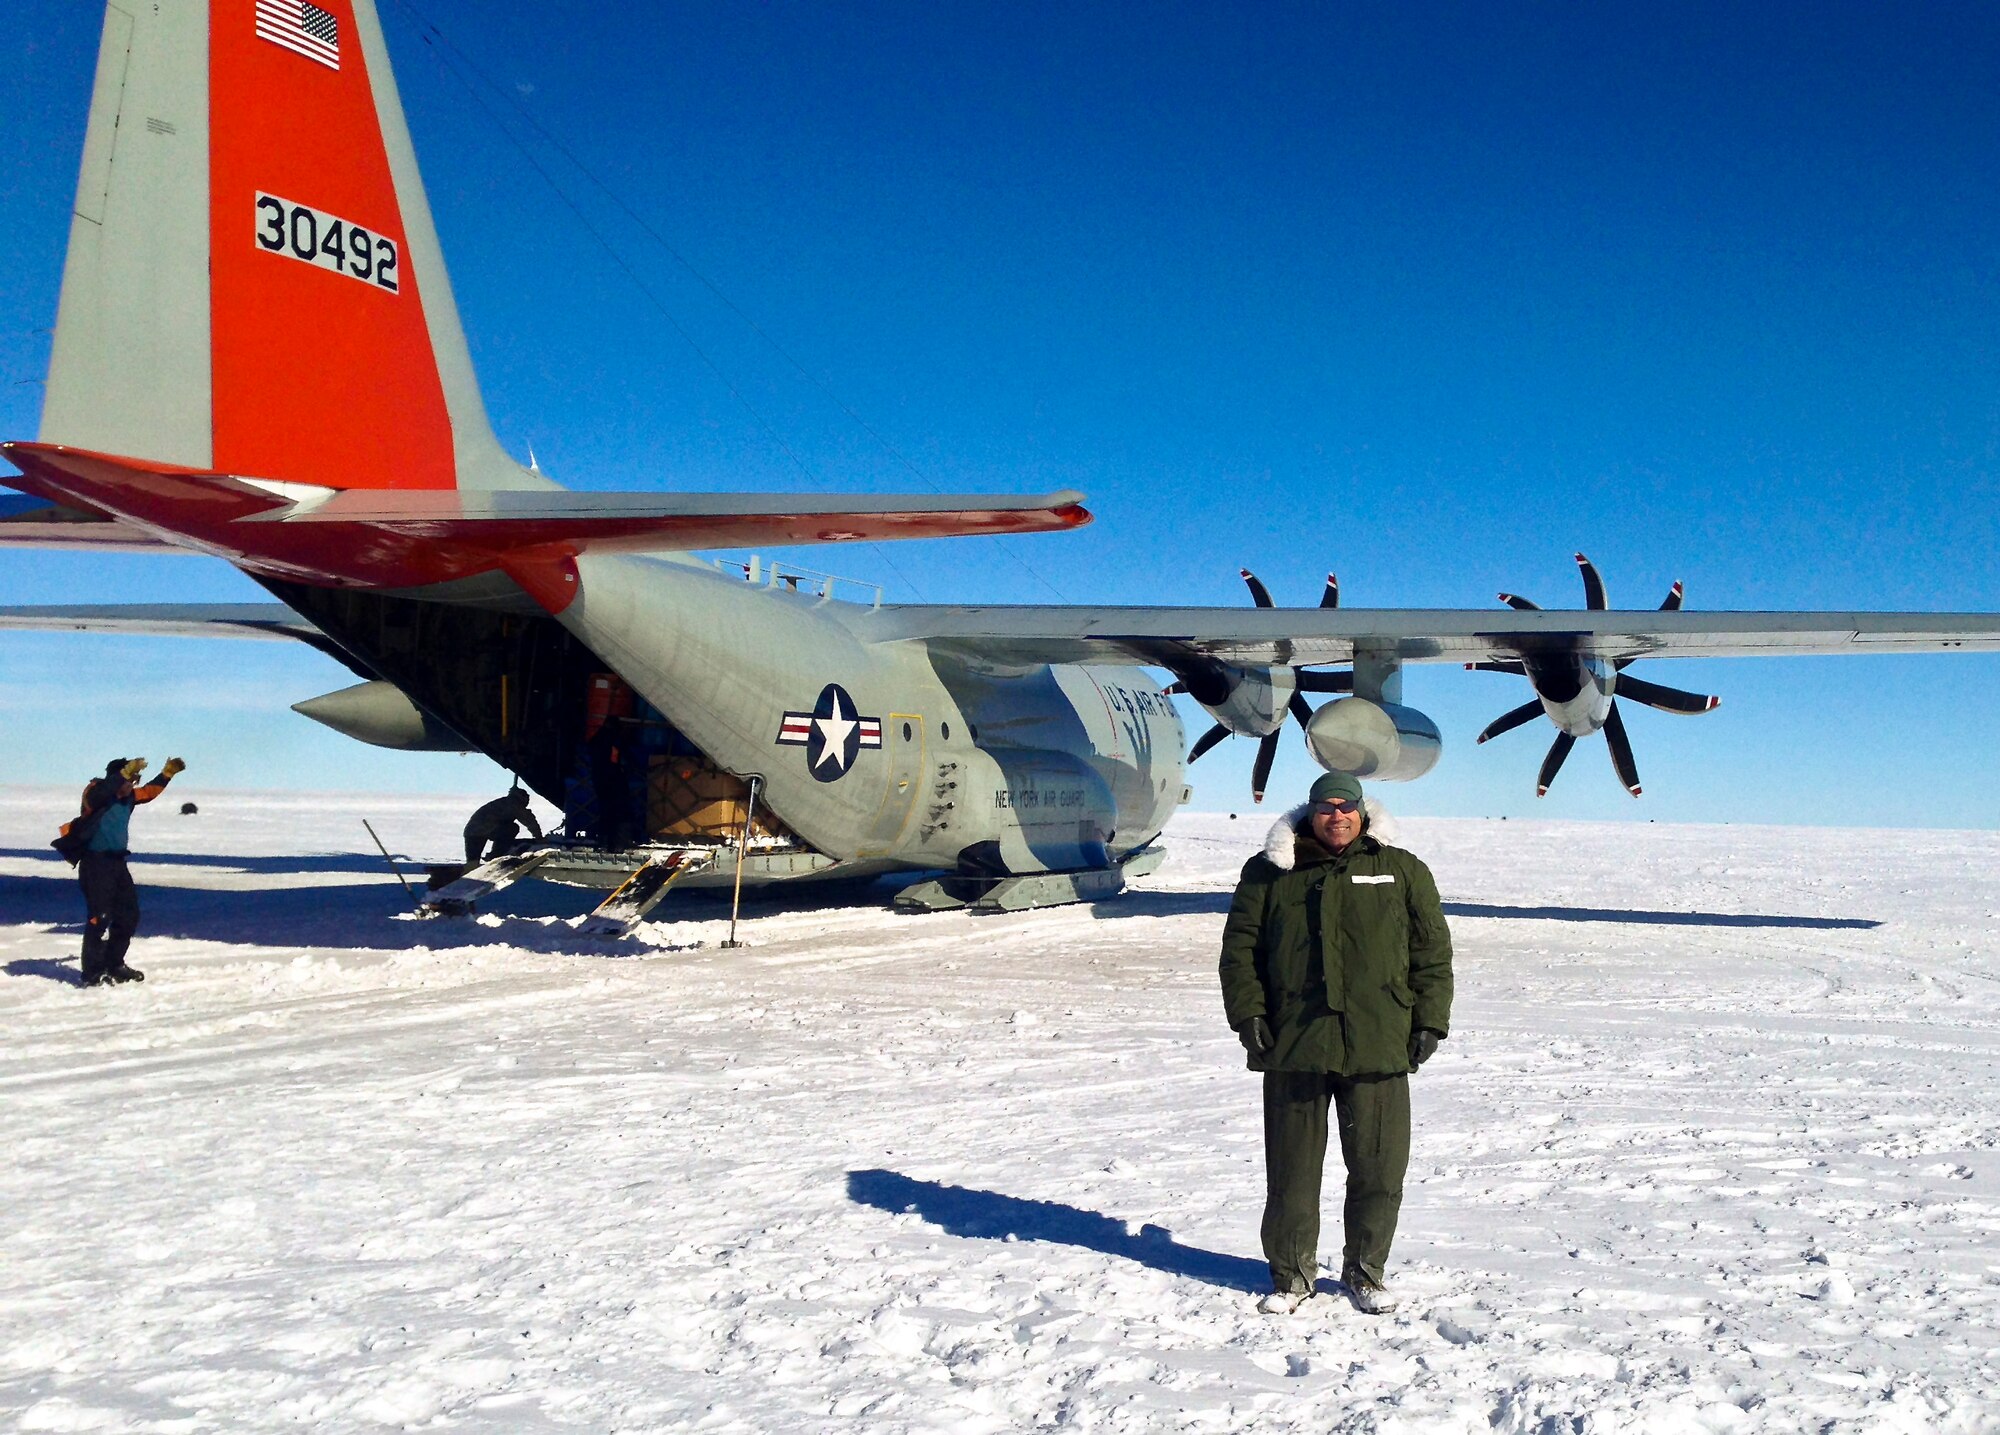 U.S. Air Force Col. Steven S. Norris, 182nd Medical Group commander, stands with a LC-130 Hercules during his deployment to McMurdo Station, Antarctica, Nov. 26, 2013. The doctor deployed as a flight surgeon in support of Operation Deep Freeze’s mission to provide airlift for the National Science Foundation. There, the Iraq and Afghanistan War veteran with almost two decades of military service experienced the most limited and remote working conditions of his career. (Courtesy photo from Col. Steven Norris/Released)